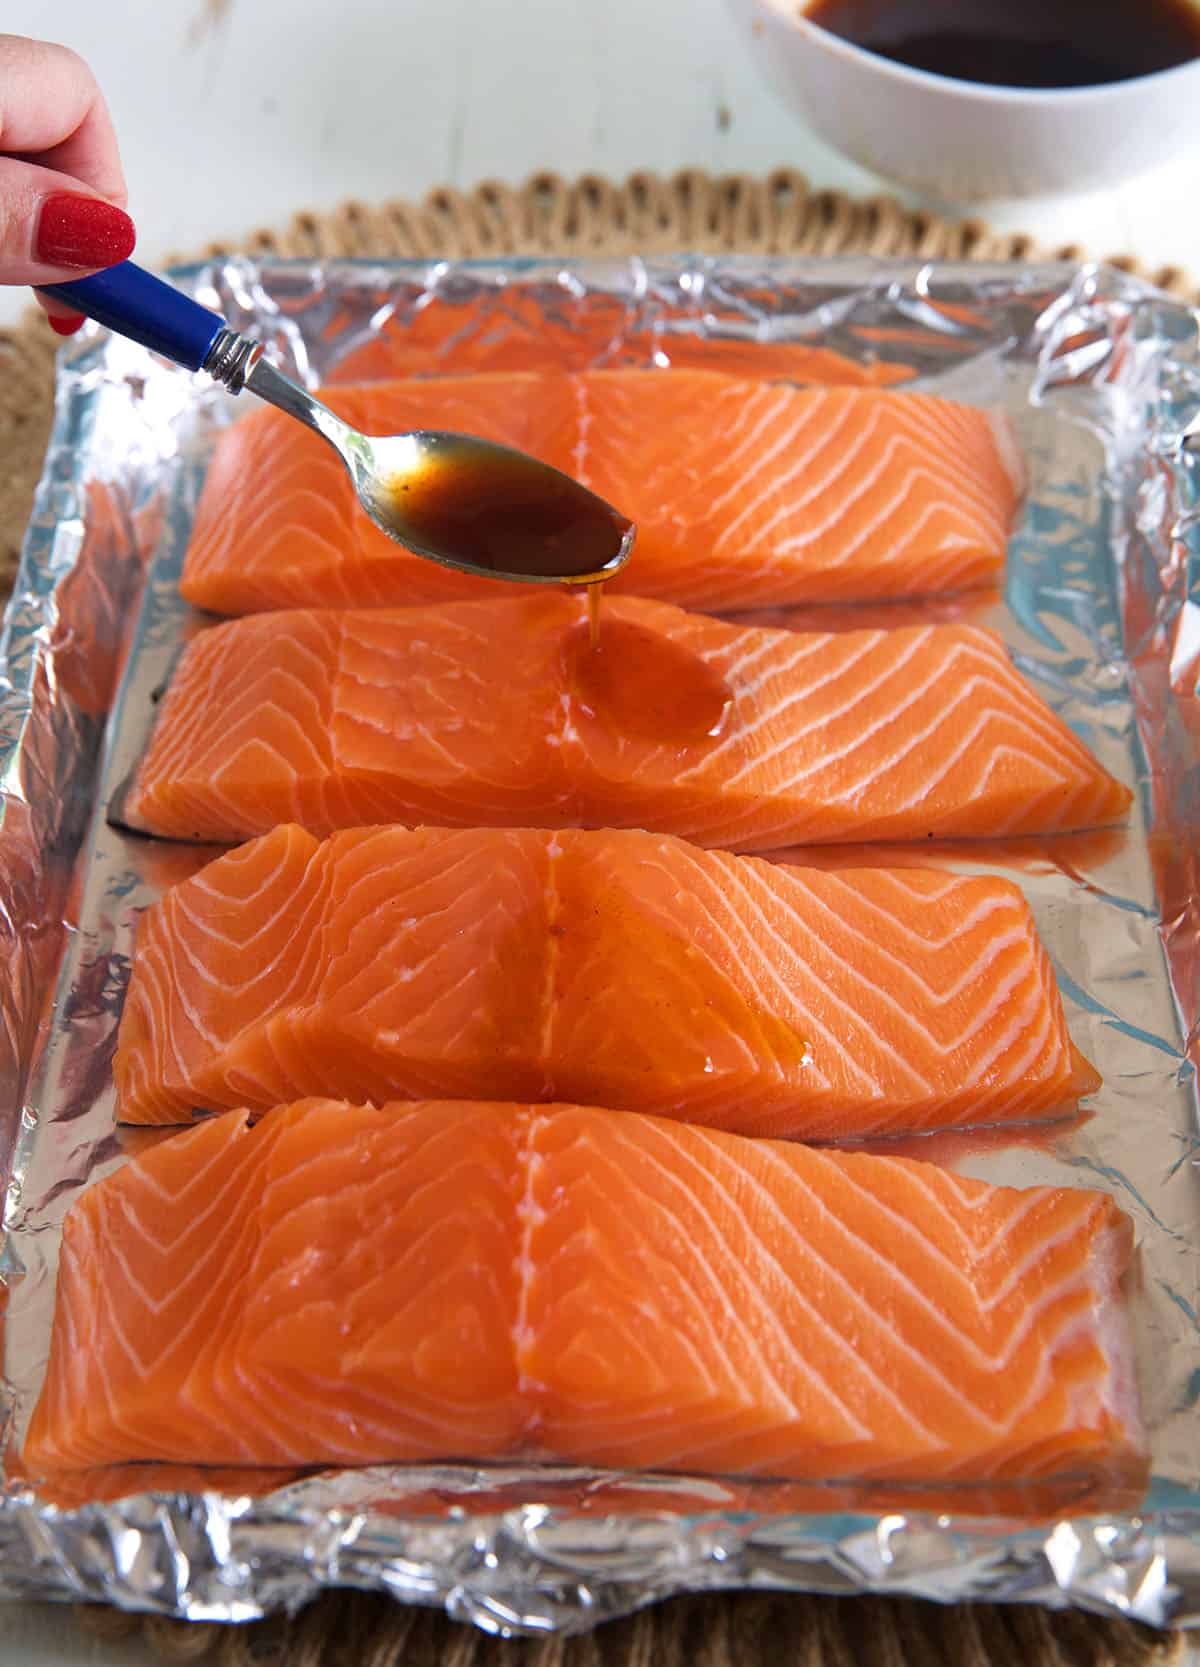 Four salmon filets are on a foil lined baking sheet and one filet is being drizzled with sauce.